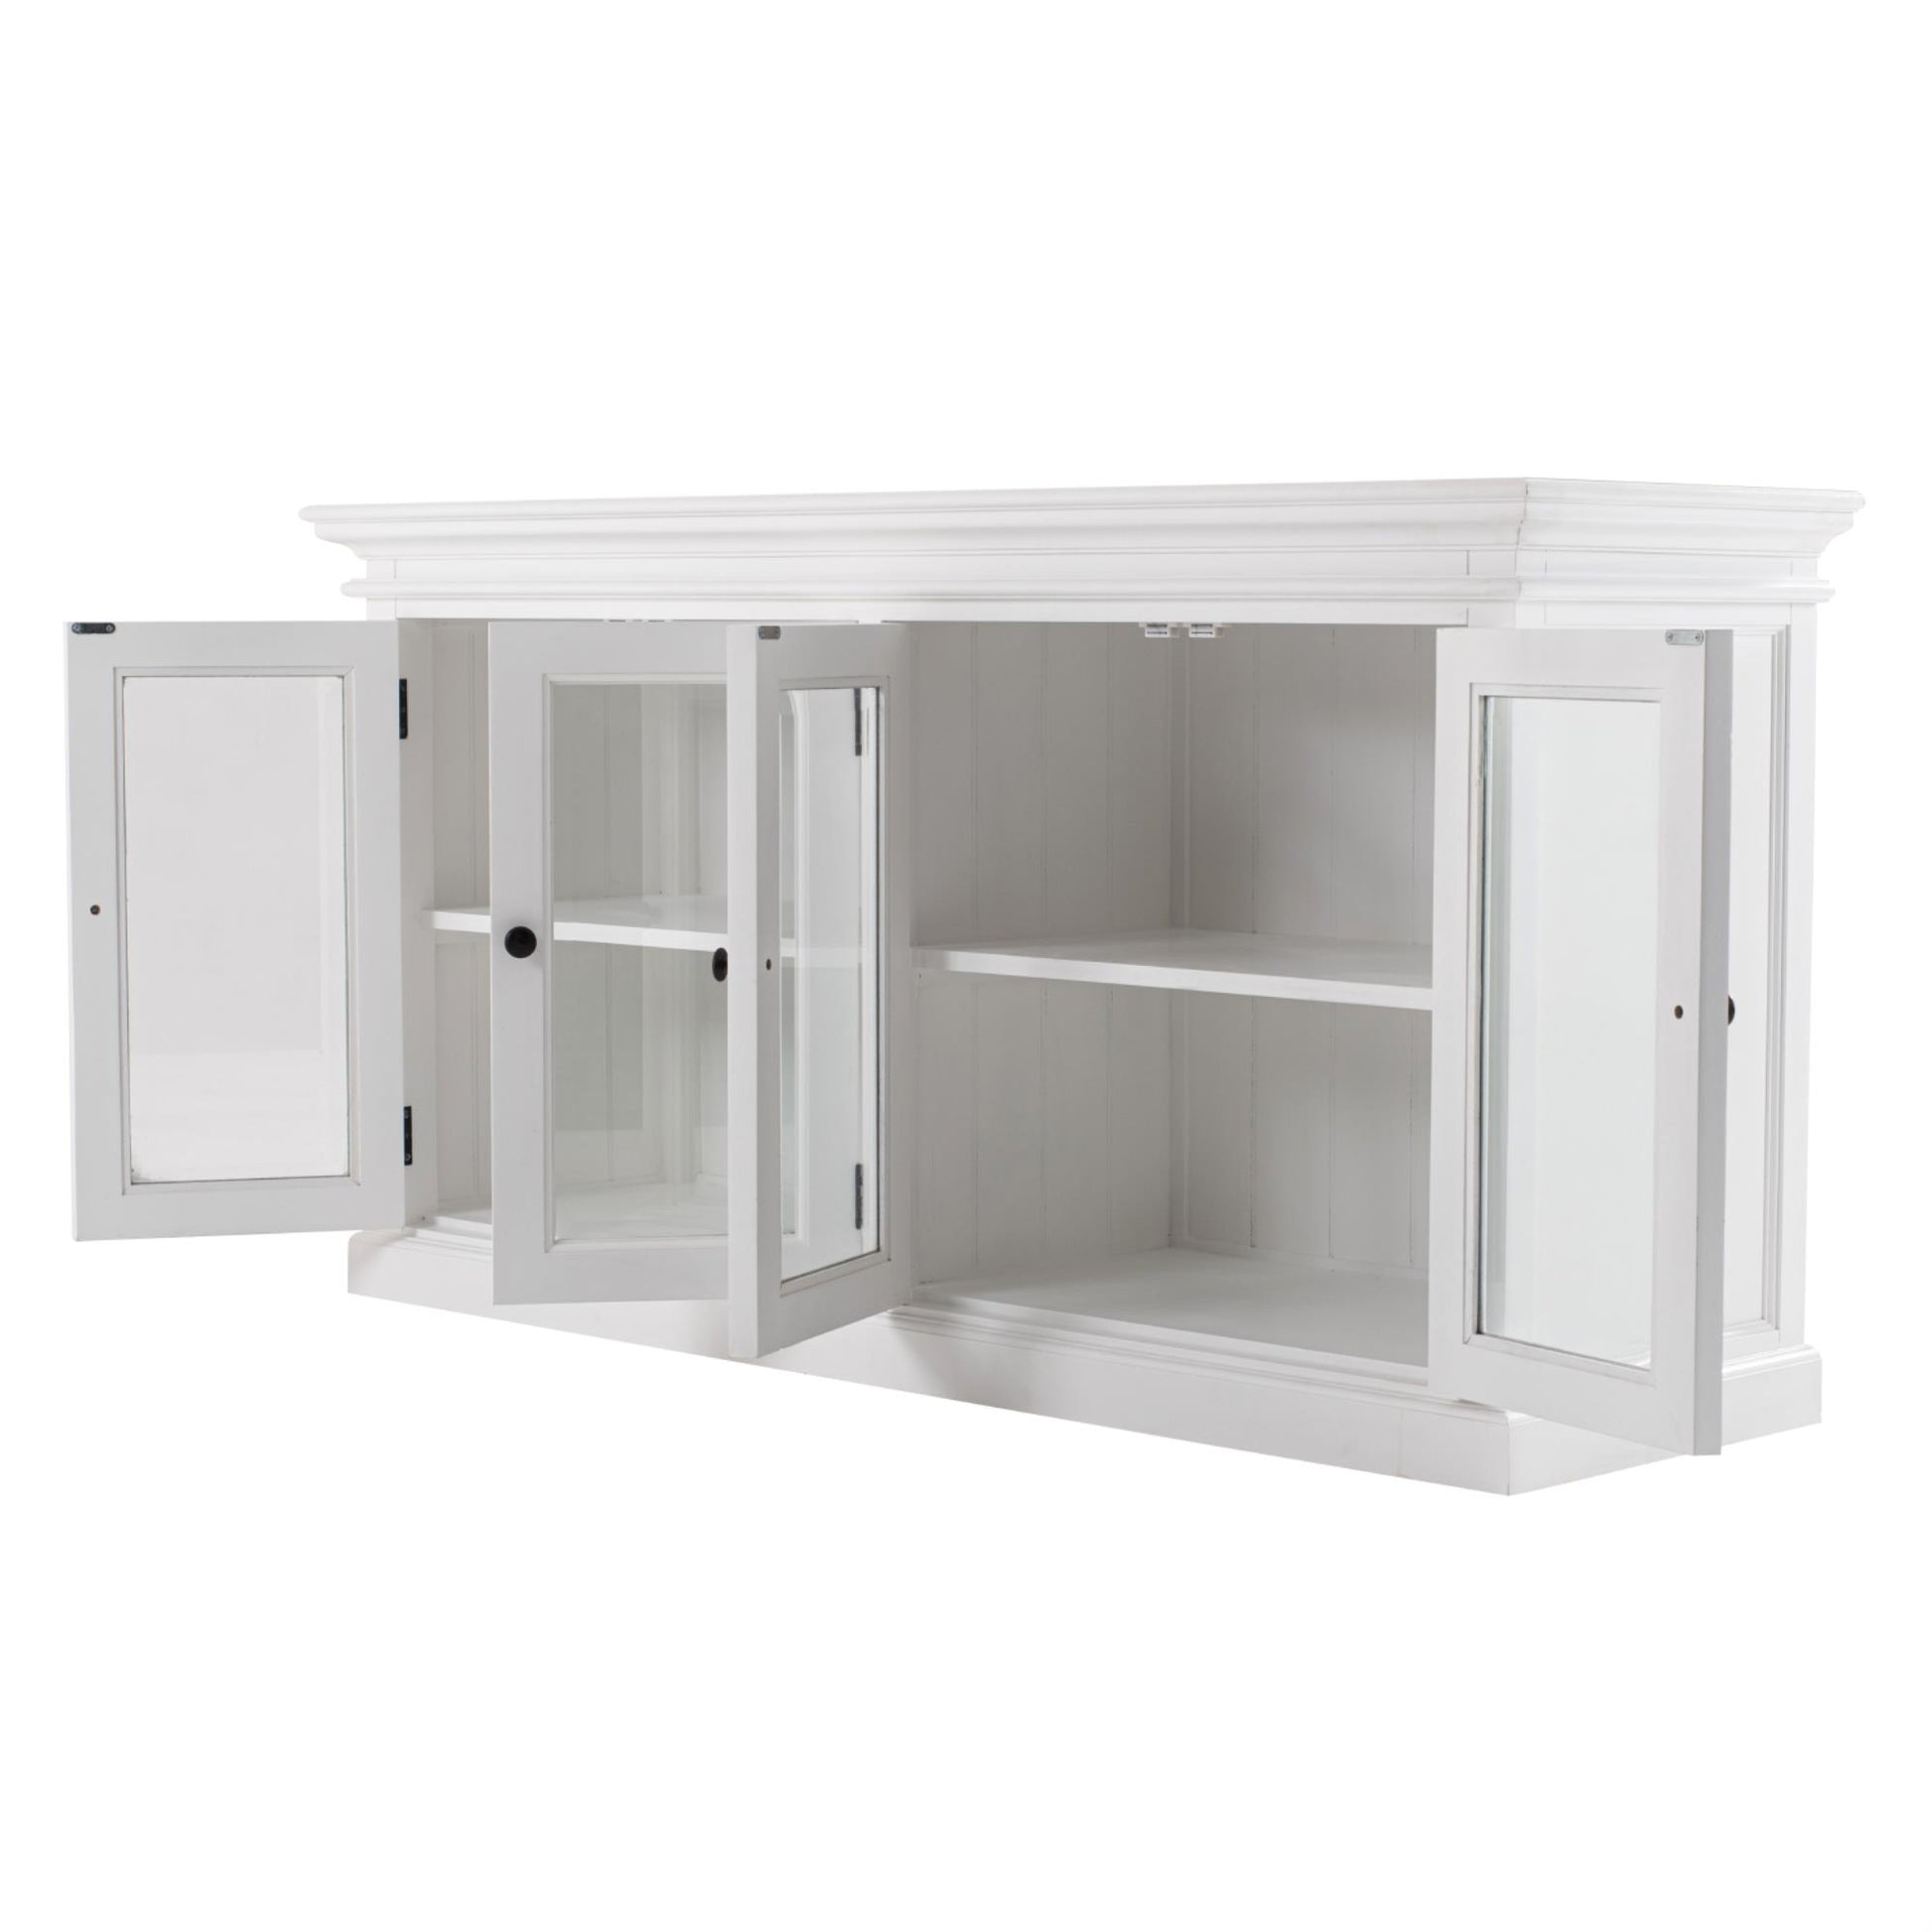 Halifax collection by Nova Solo.  Display Buffet with 4 Glass Doors CasaFenix